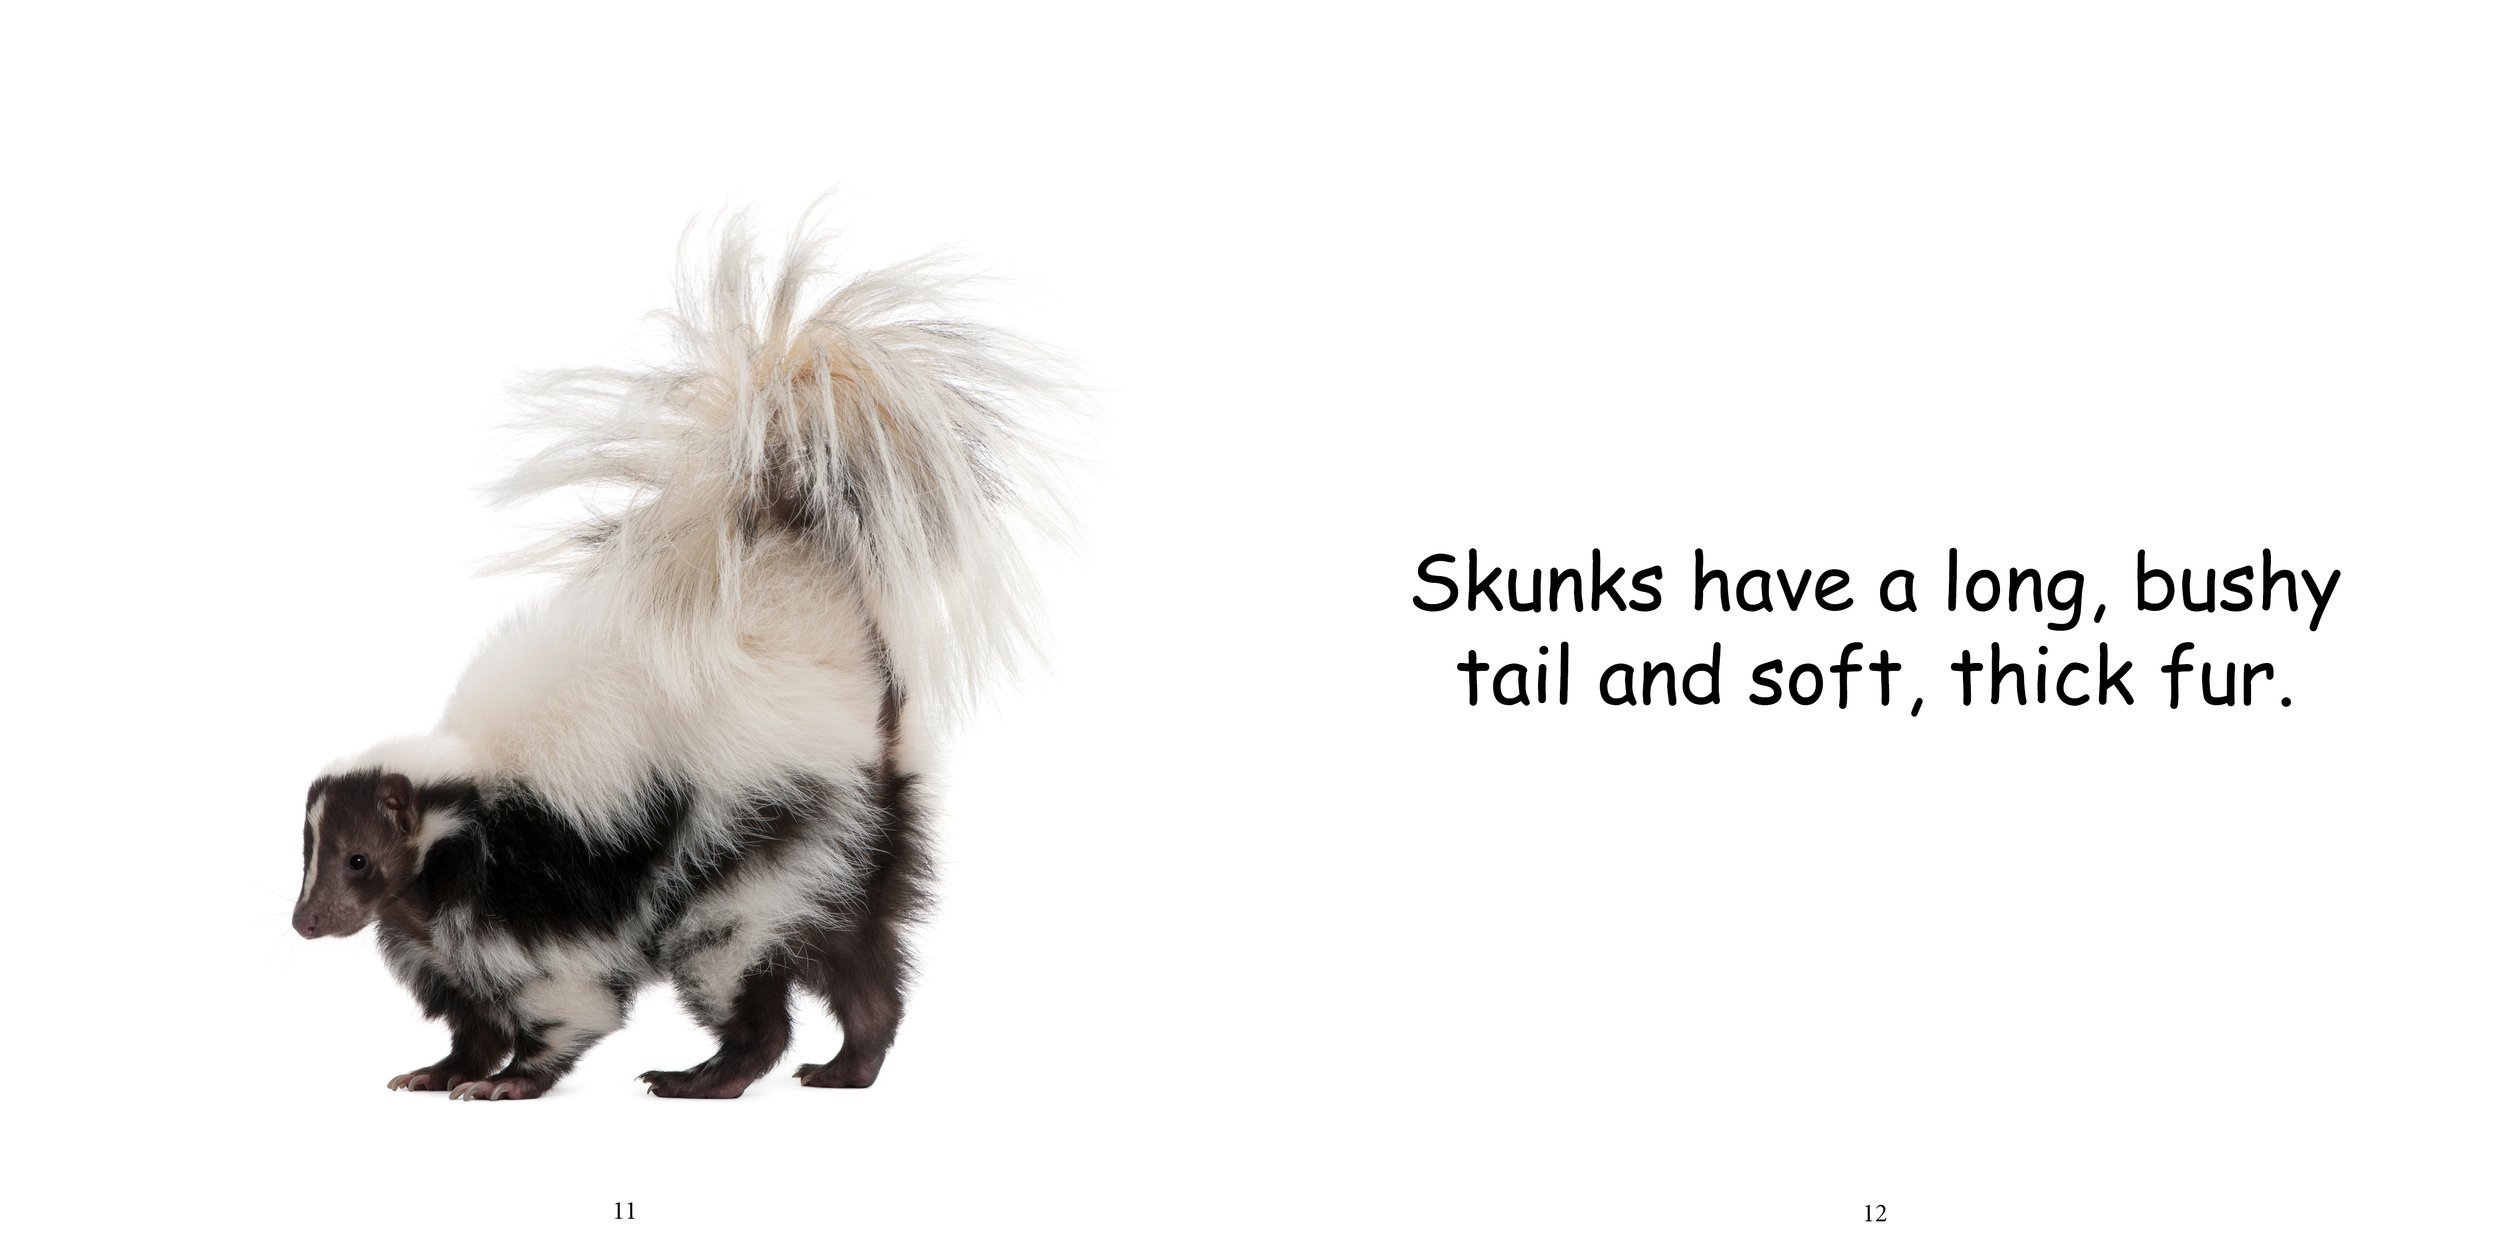 Everything about Skunks10.jpg